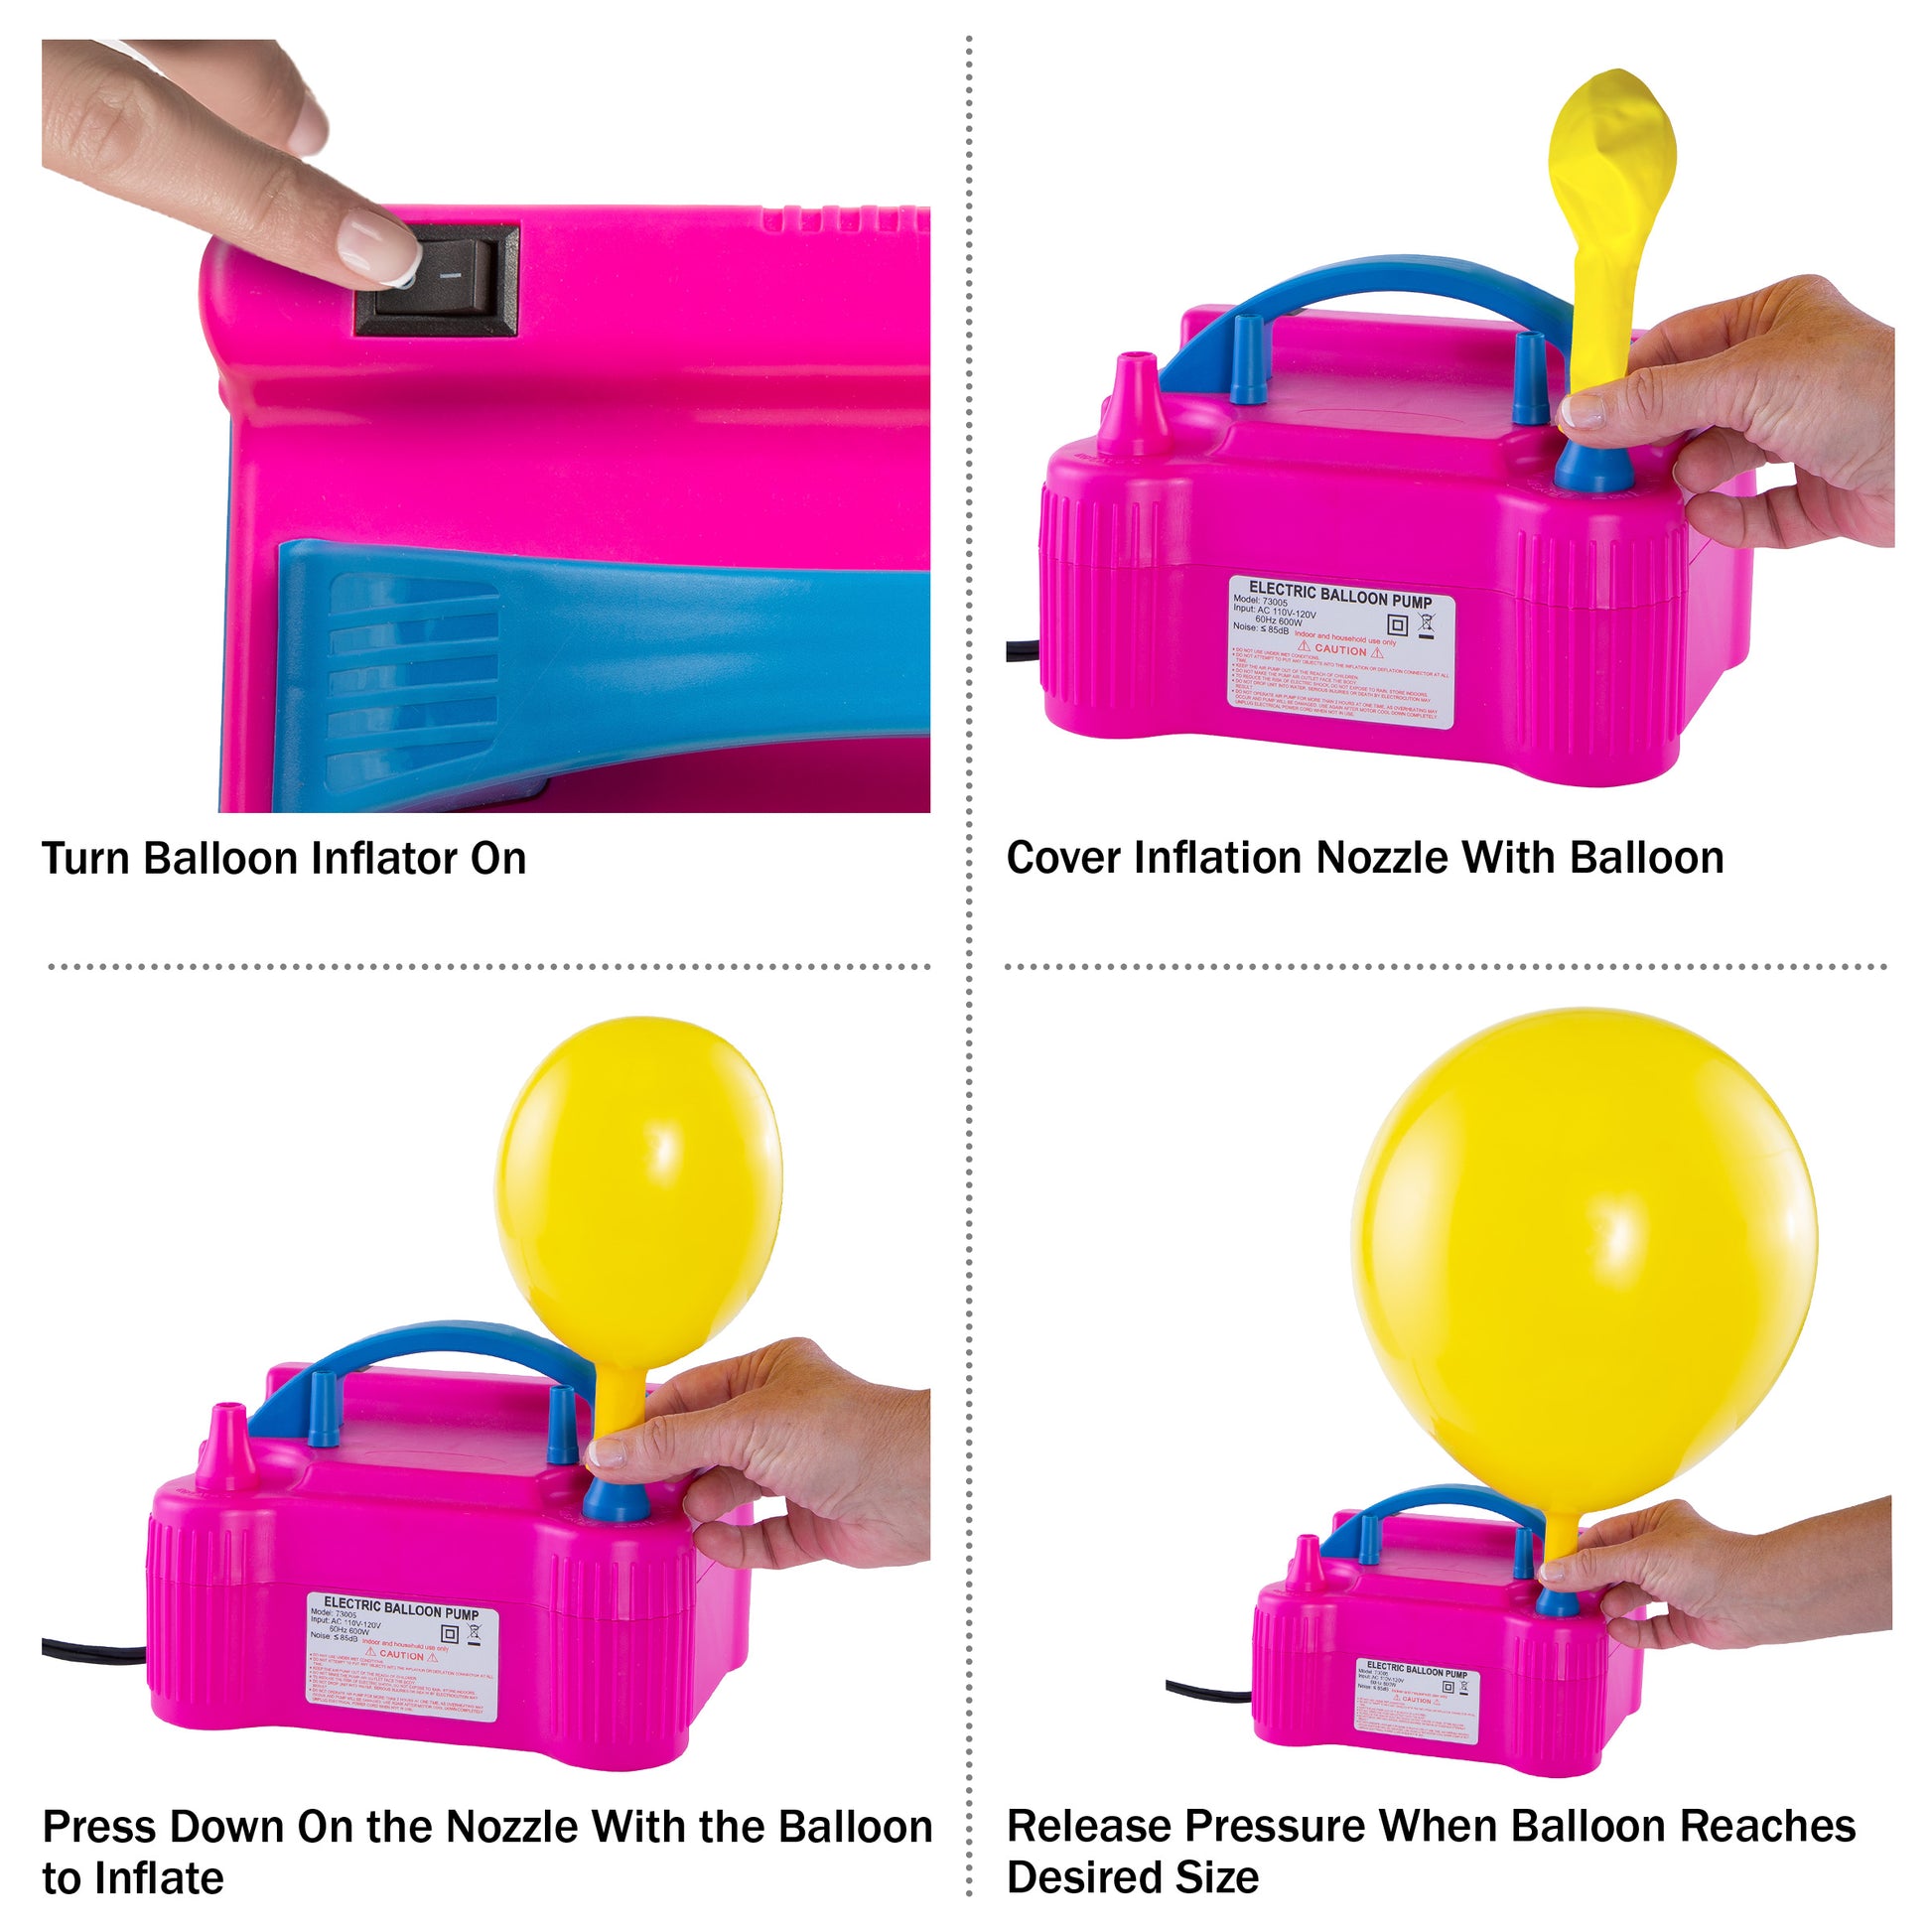 Electric Balloon Pump - Inflates Balloons in 3 Seconds - Lightweight and Portable Balloon Inflator by Great Northern Popcorn (Pink)